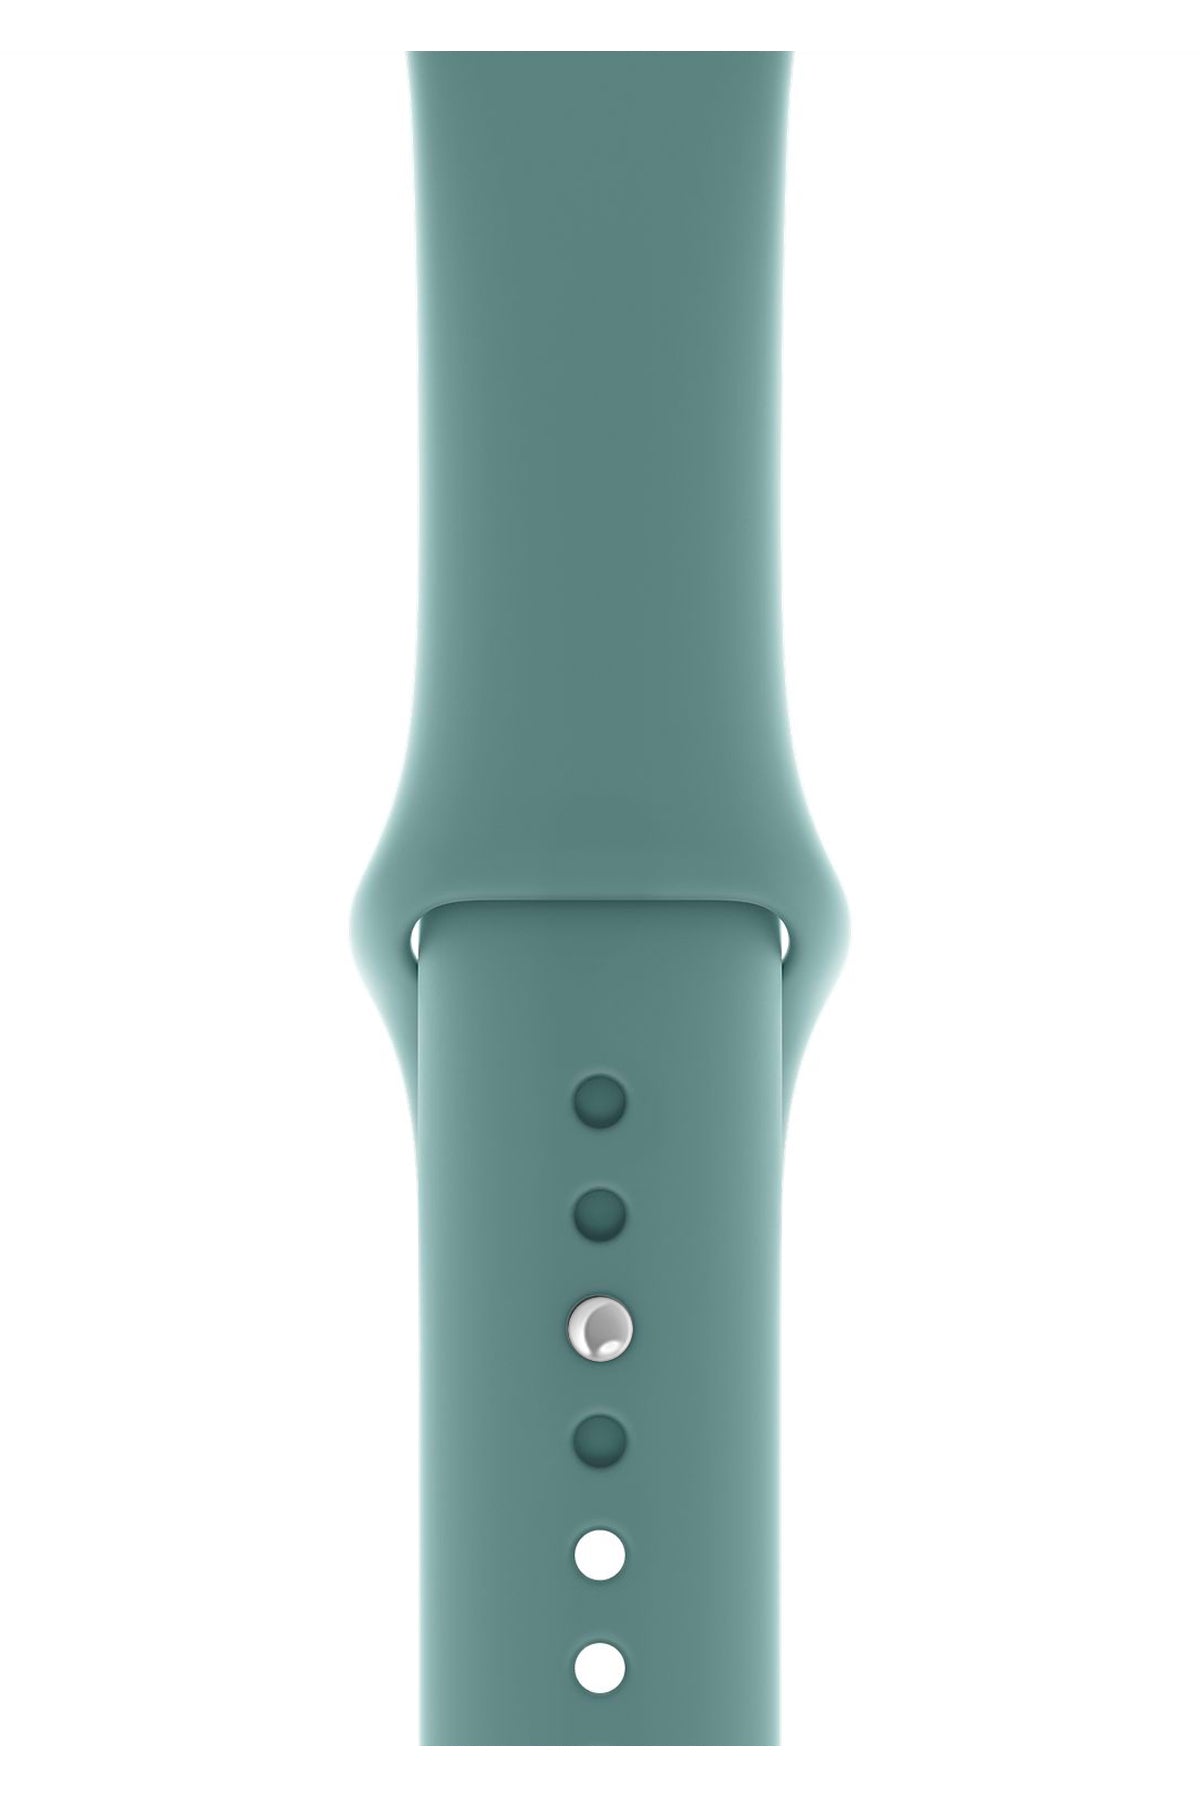 Apple Watch Compatible Silicone Sport Band Cactus Green